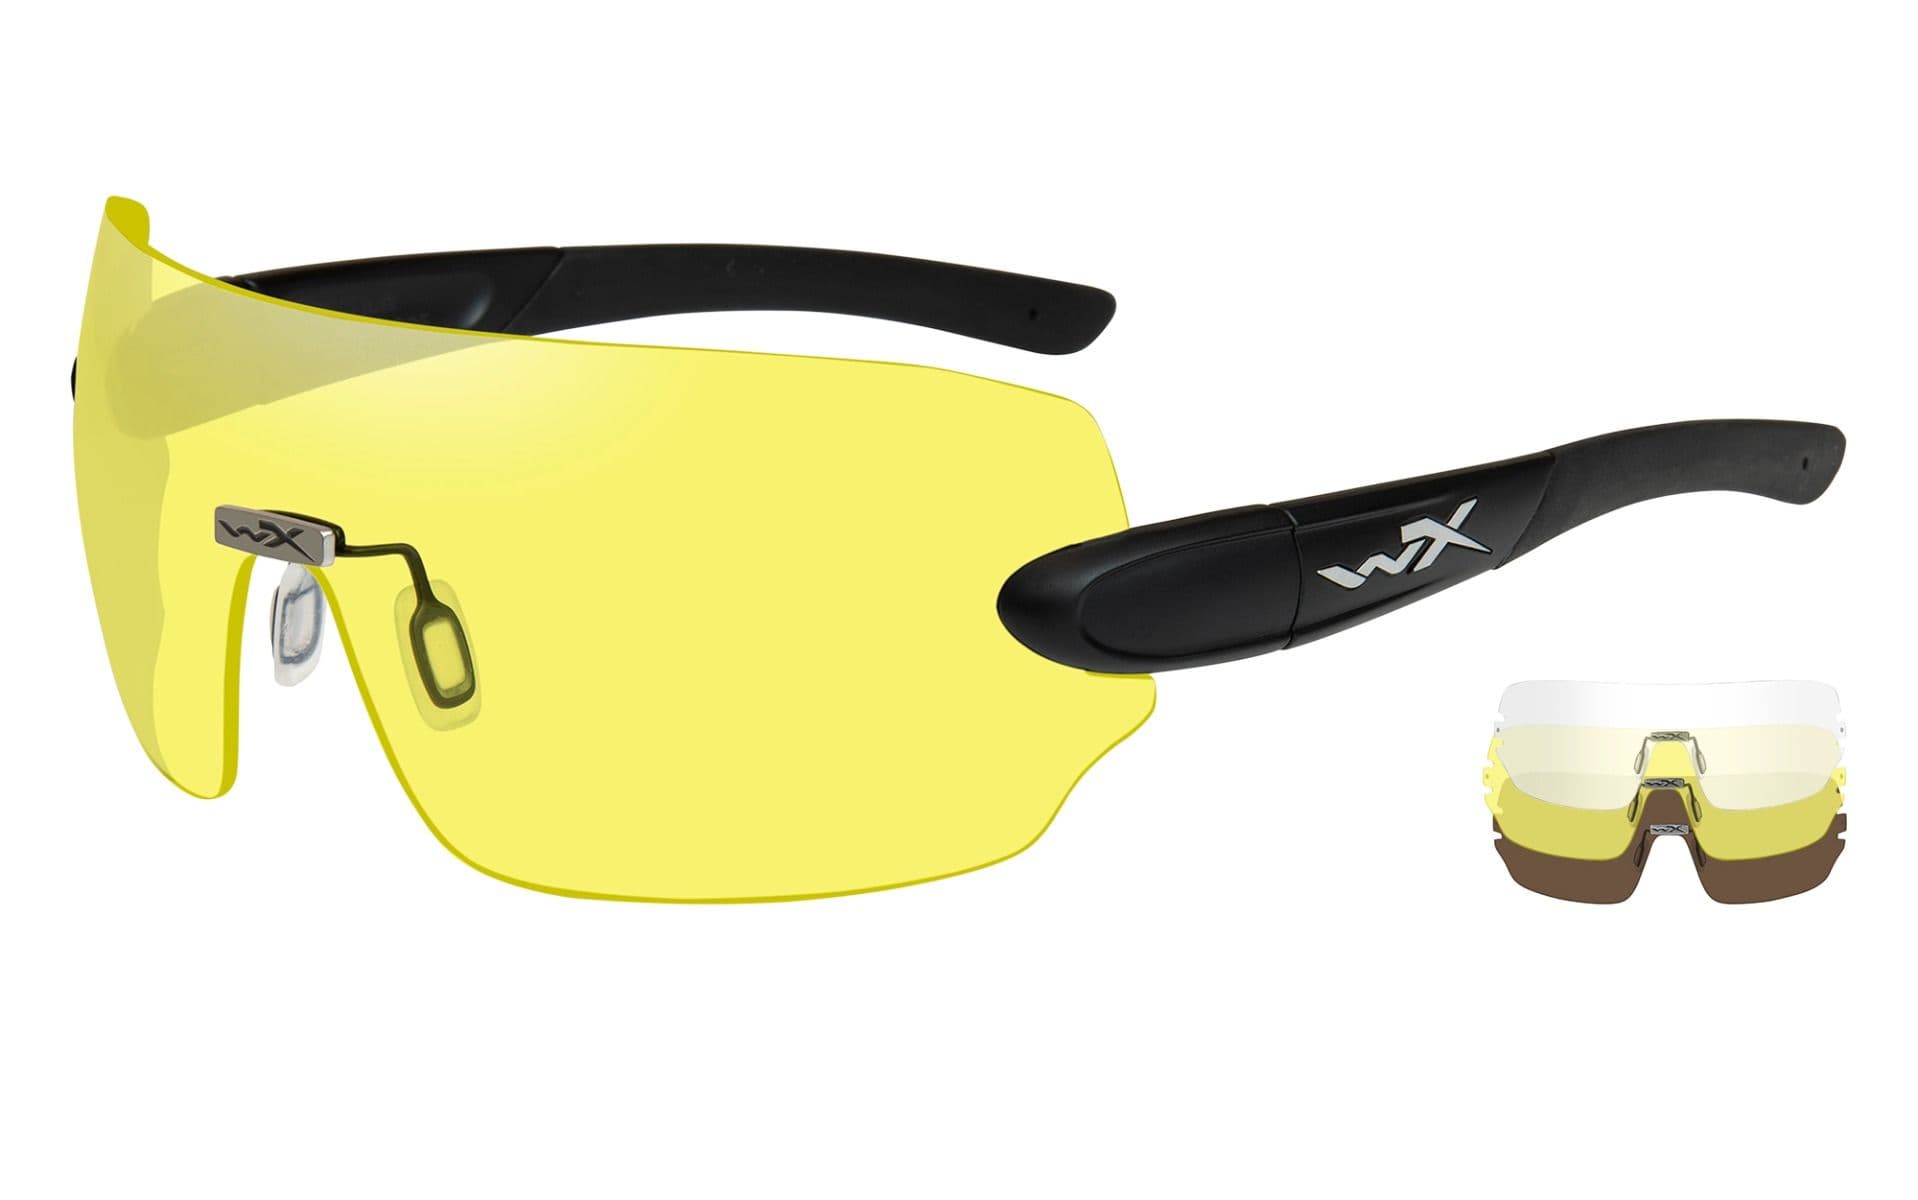 Wiley-X WX Detection Sunglasses